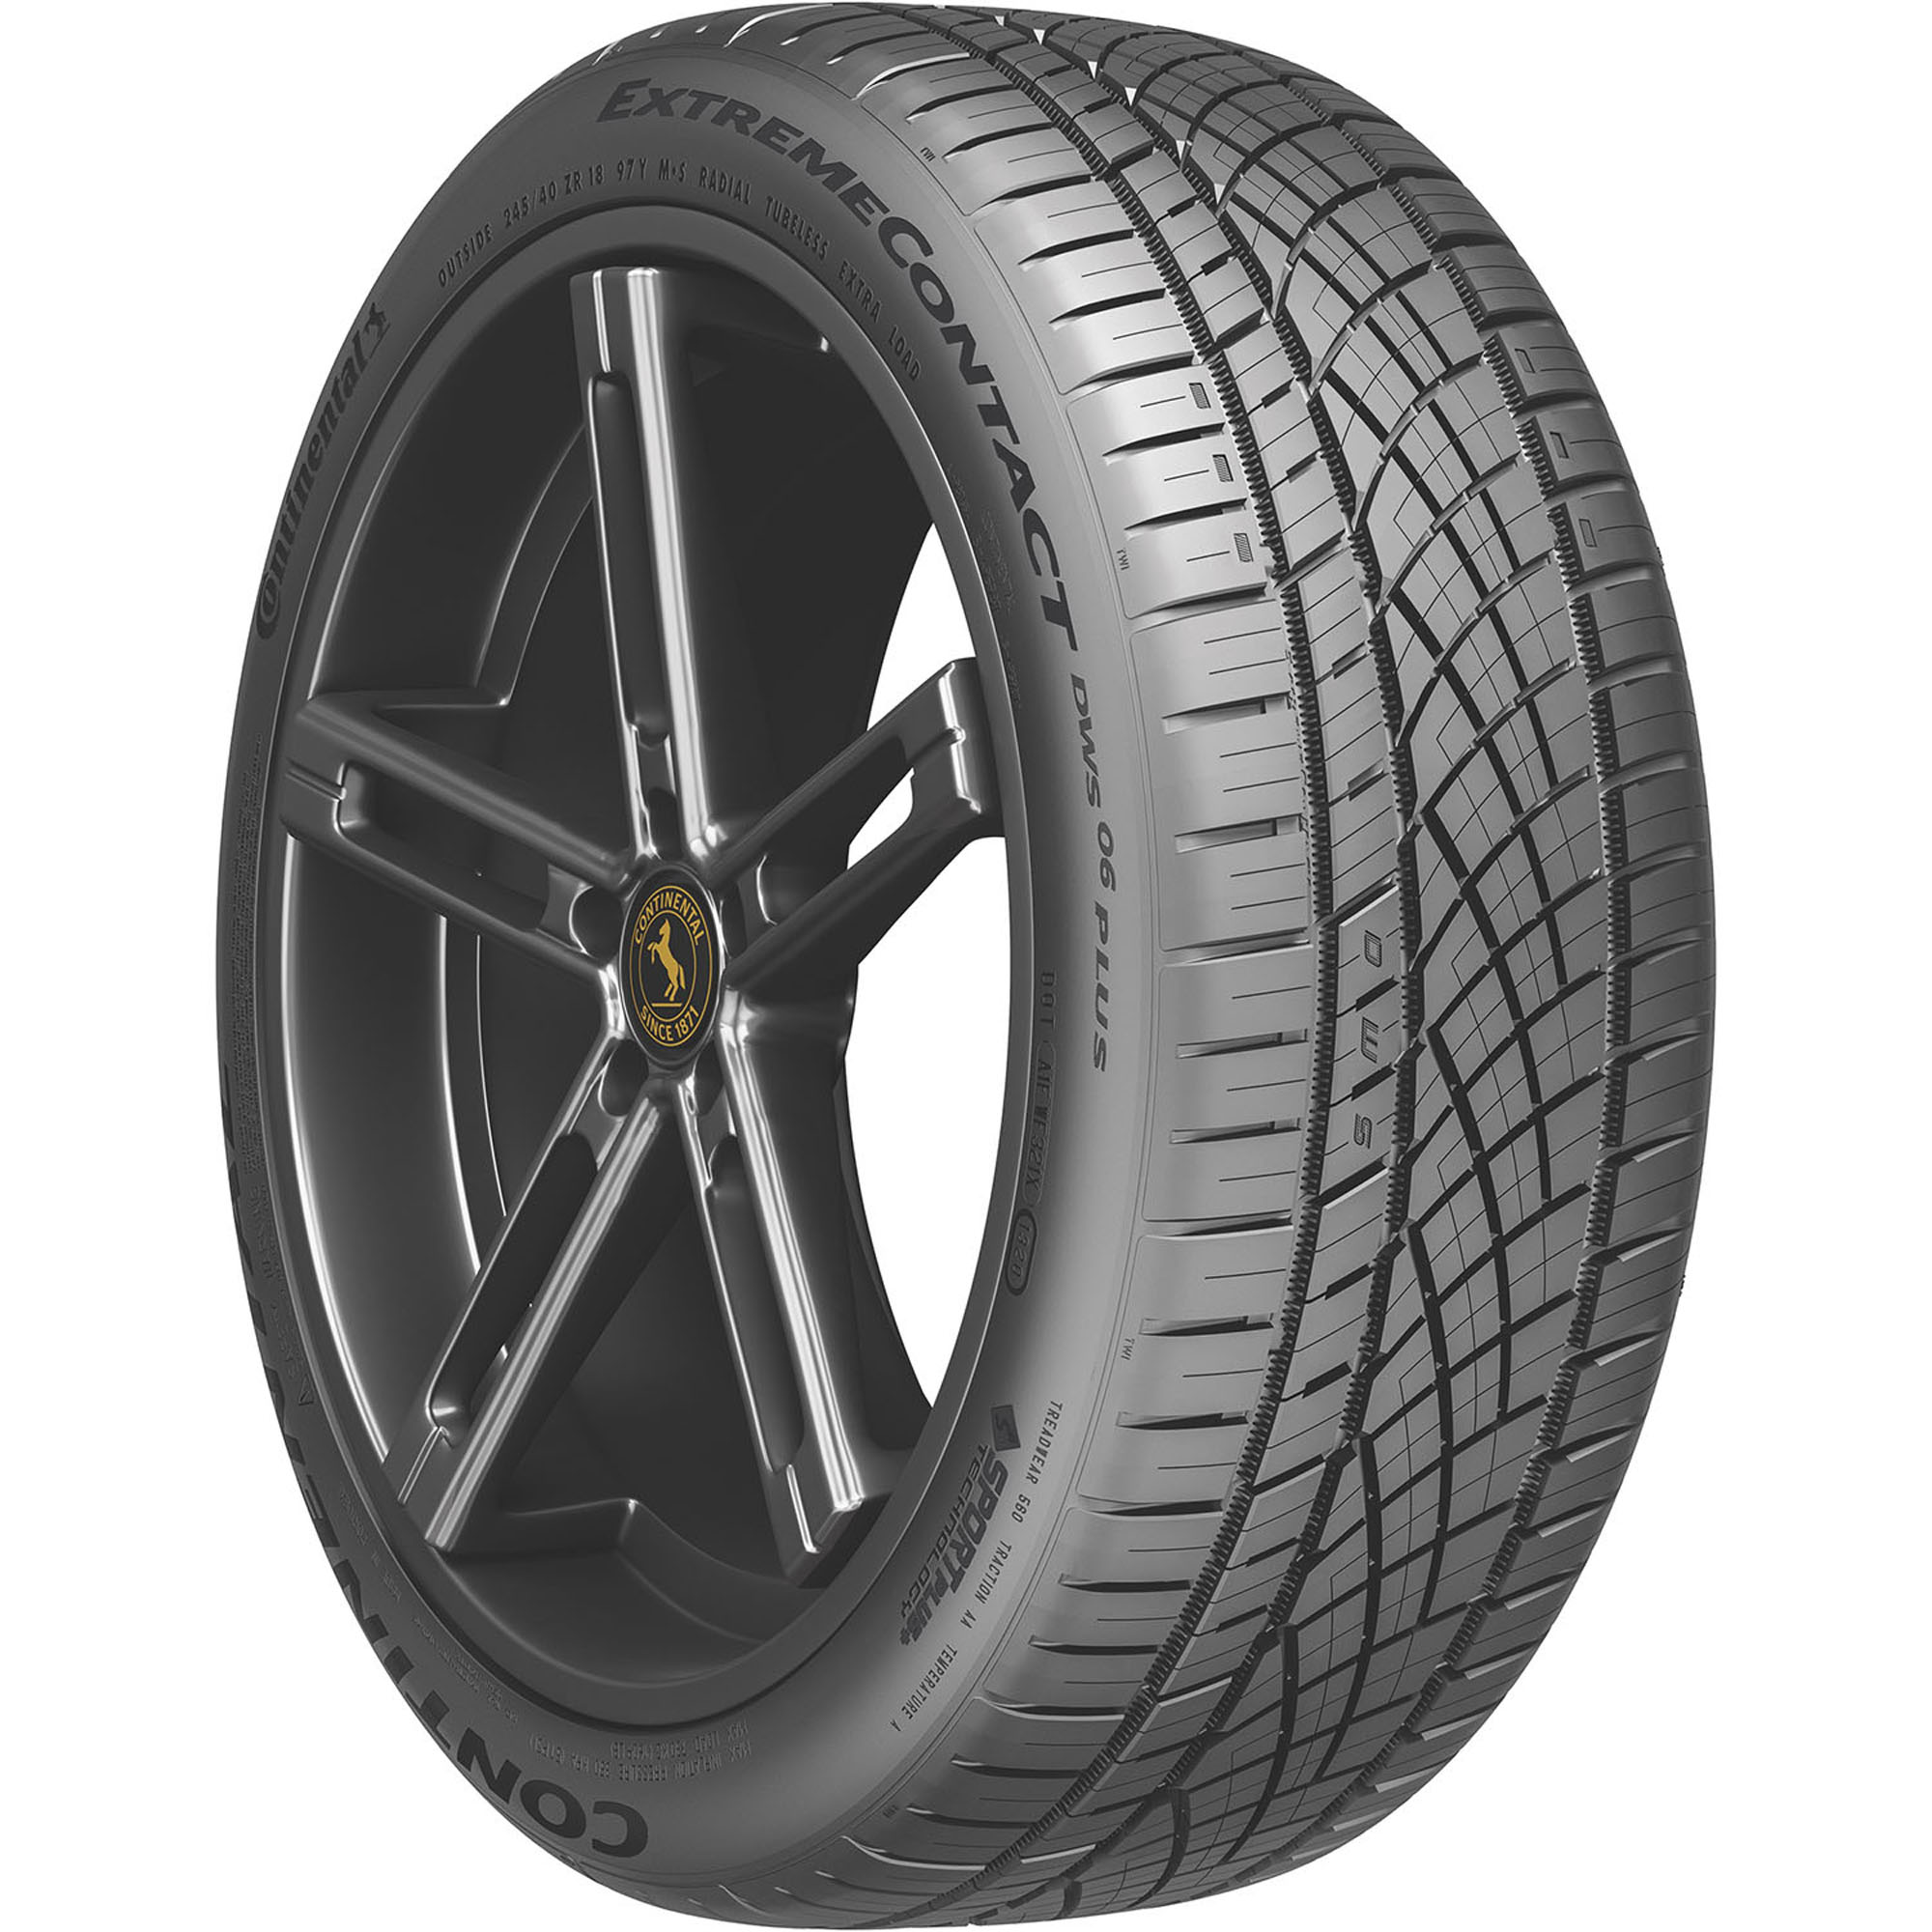 Continental ExtremeContact DWS06 PLUS All Season 275/35ZR20 102Y XL Passenger Tire - image 5 of 6